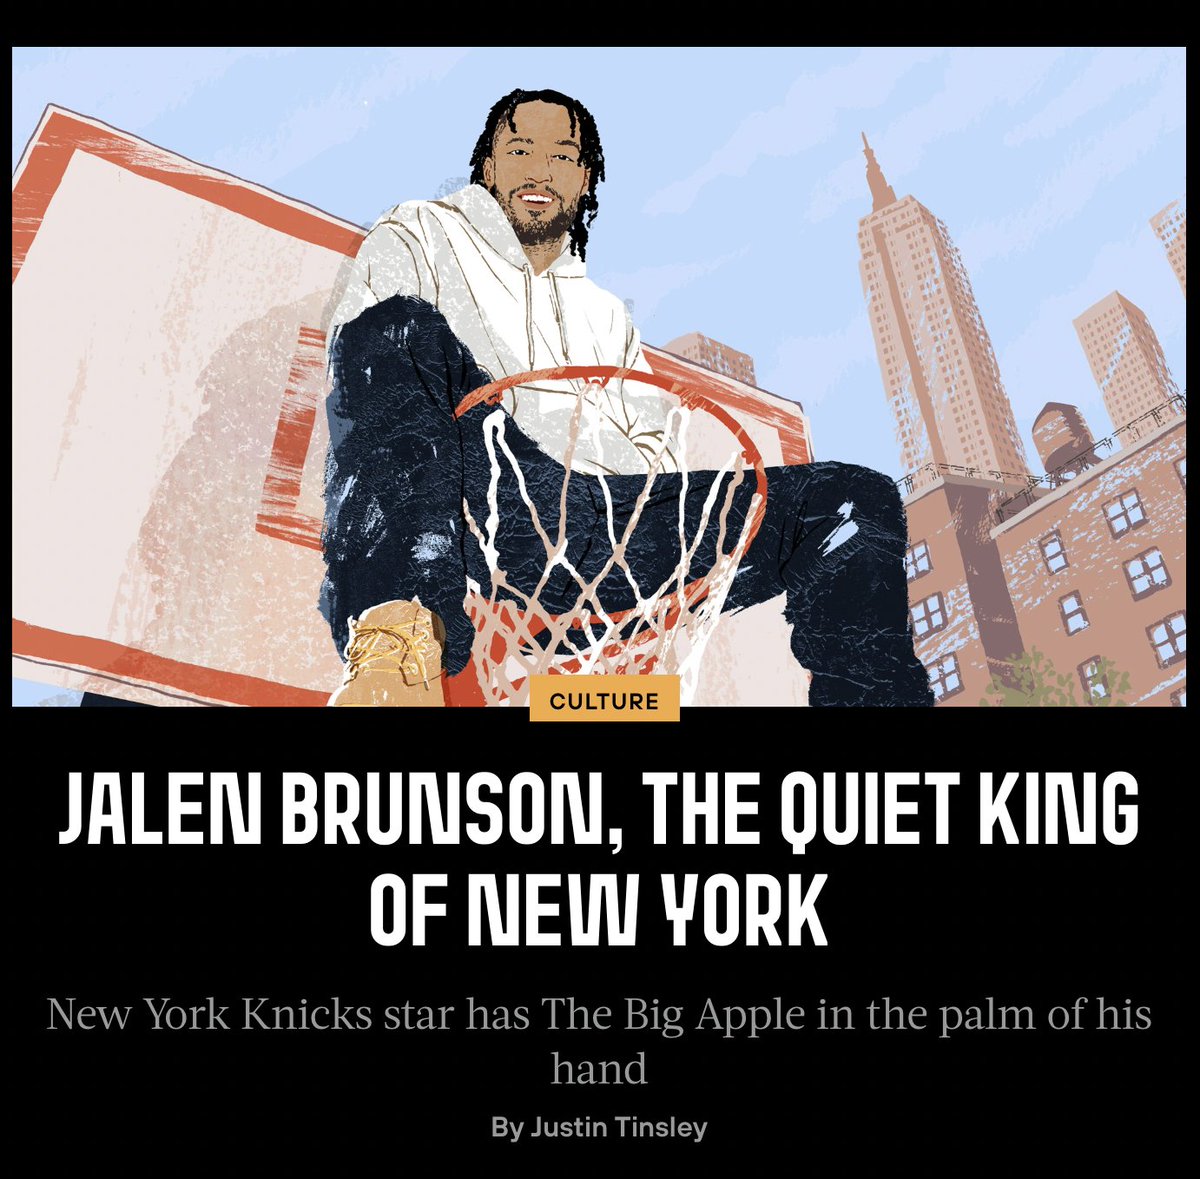 'Everyone in New York feels good about the team and the city. It’s amazing how a sport can do that.' - Sandra Brunson on her son Jalen's impact on the Knicks and the city of New York. Read more on @andscape: andscape.com/features/jalen…